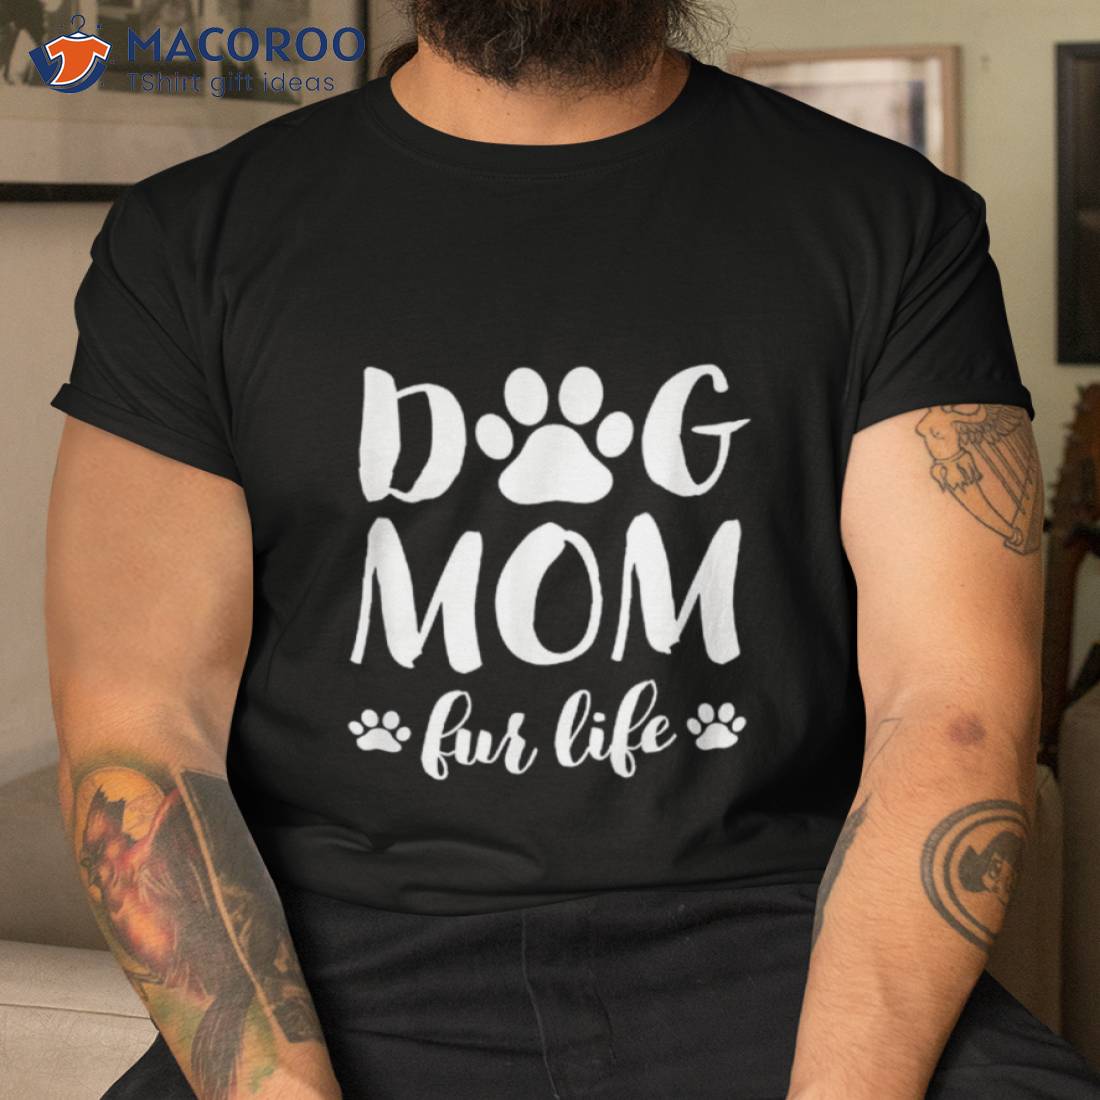 https://images.macoroo.com/wp-content/uploads/2023/05/dog-mom-fur-life-shirt-mothers-day-gift-for-wife-dogs-tshirt.jpg